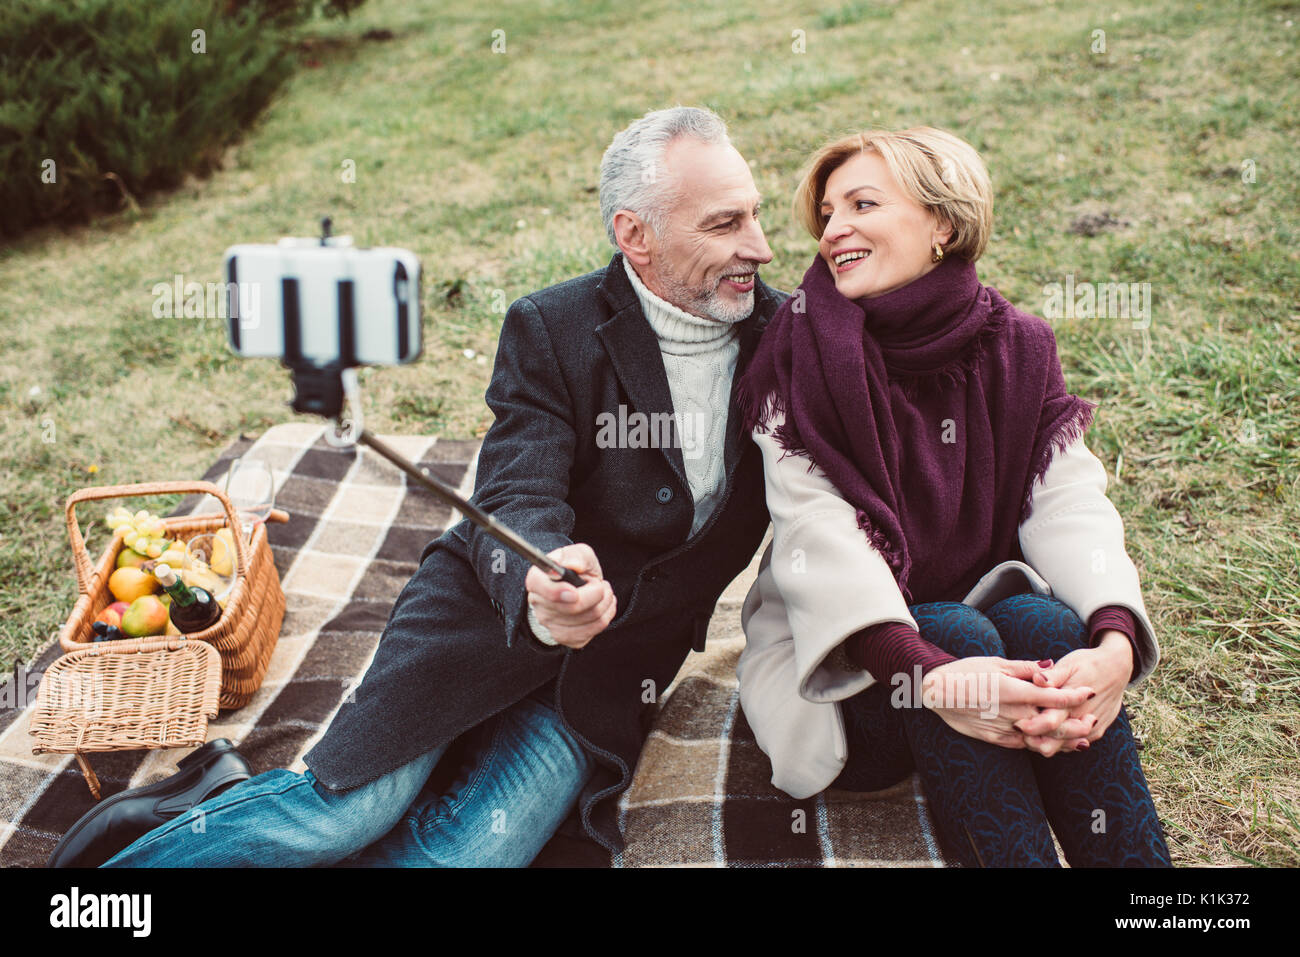 Beautiful smiling mature couple taking selfie and sitting on plaid with picnic basket in autumn park Stock Photo